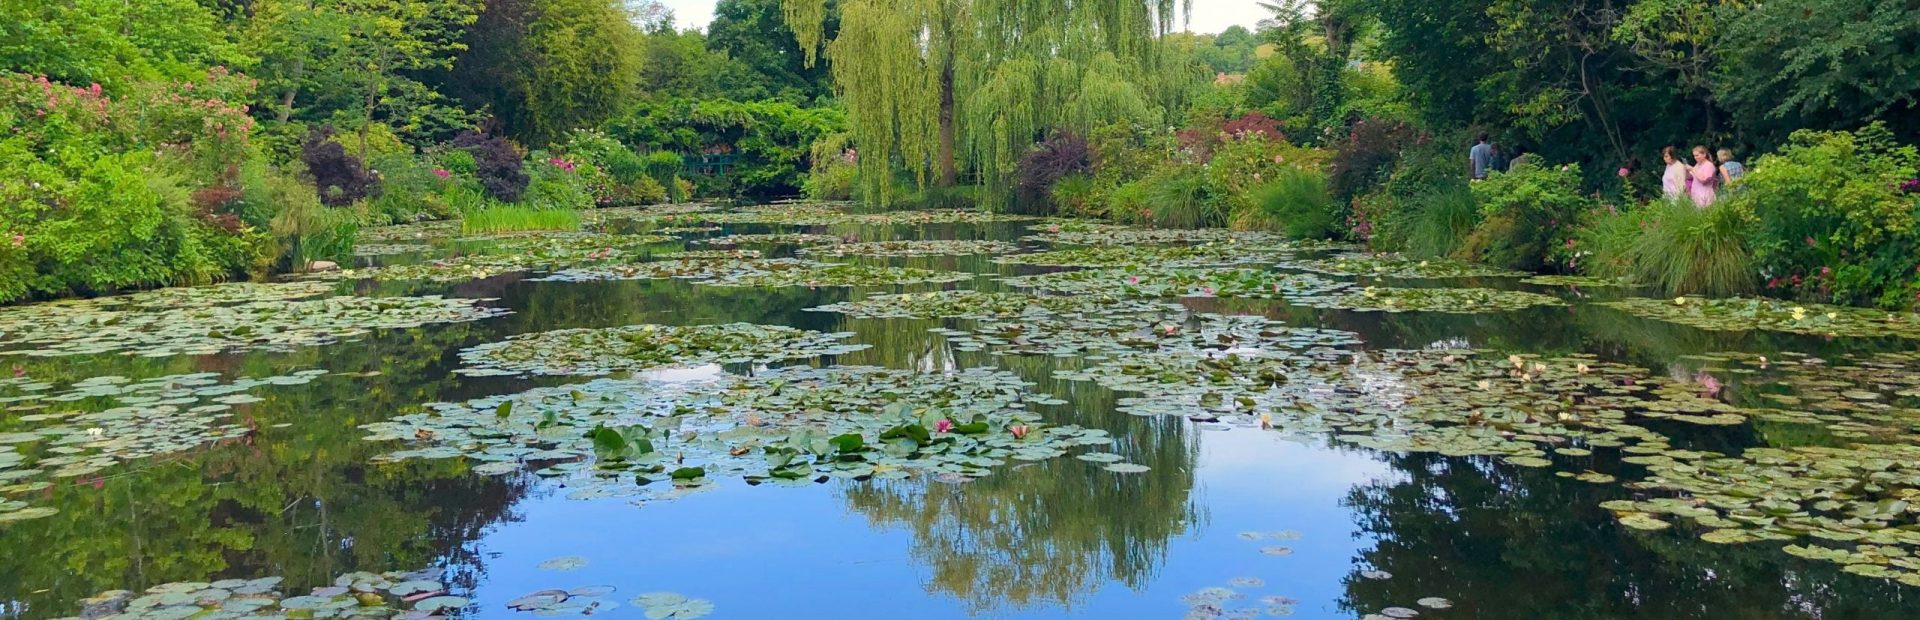 Giverny-France-water-lilies